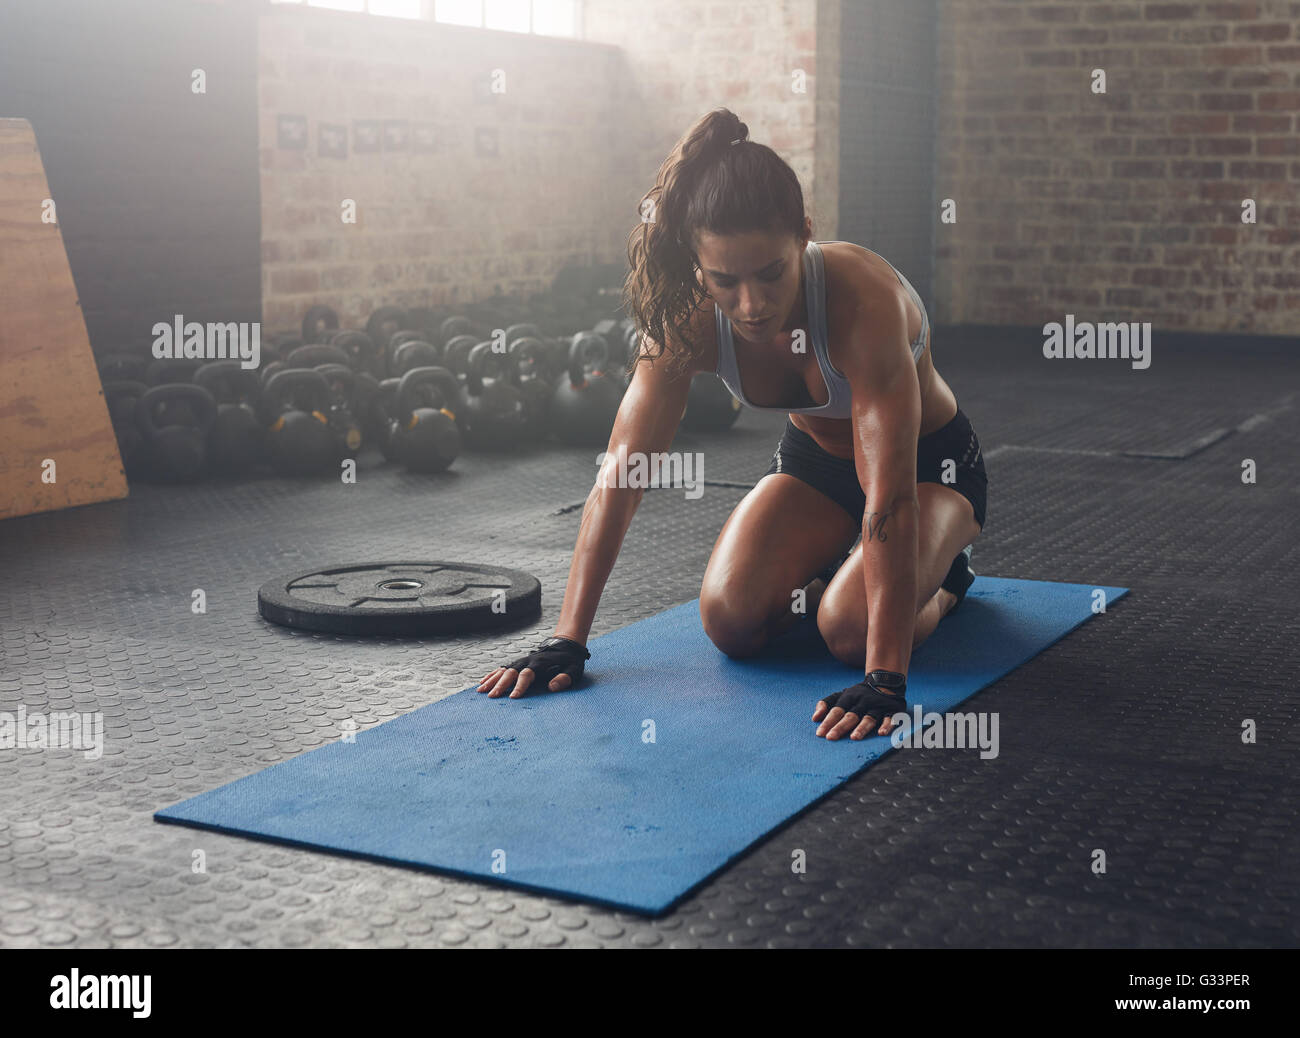 Indoor shot of muscular woman exercising at the gym. Fitness woman sitting on exercise mat. Stock Photo